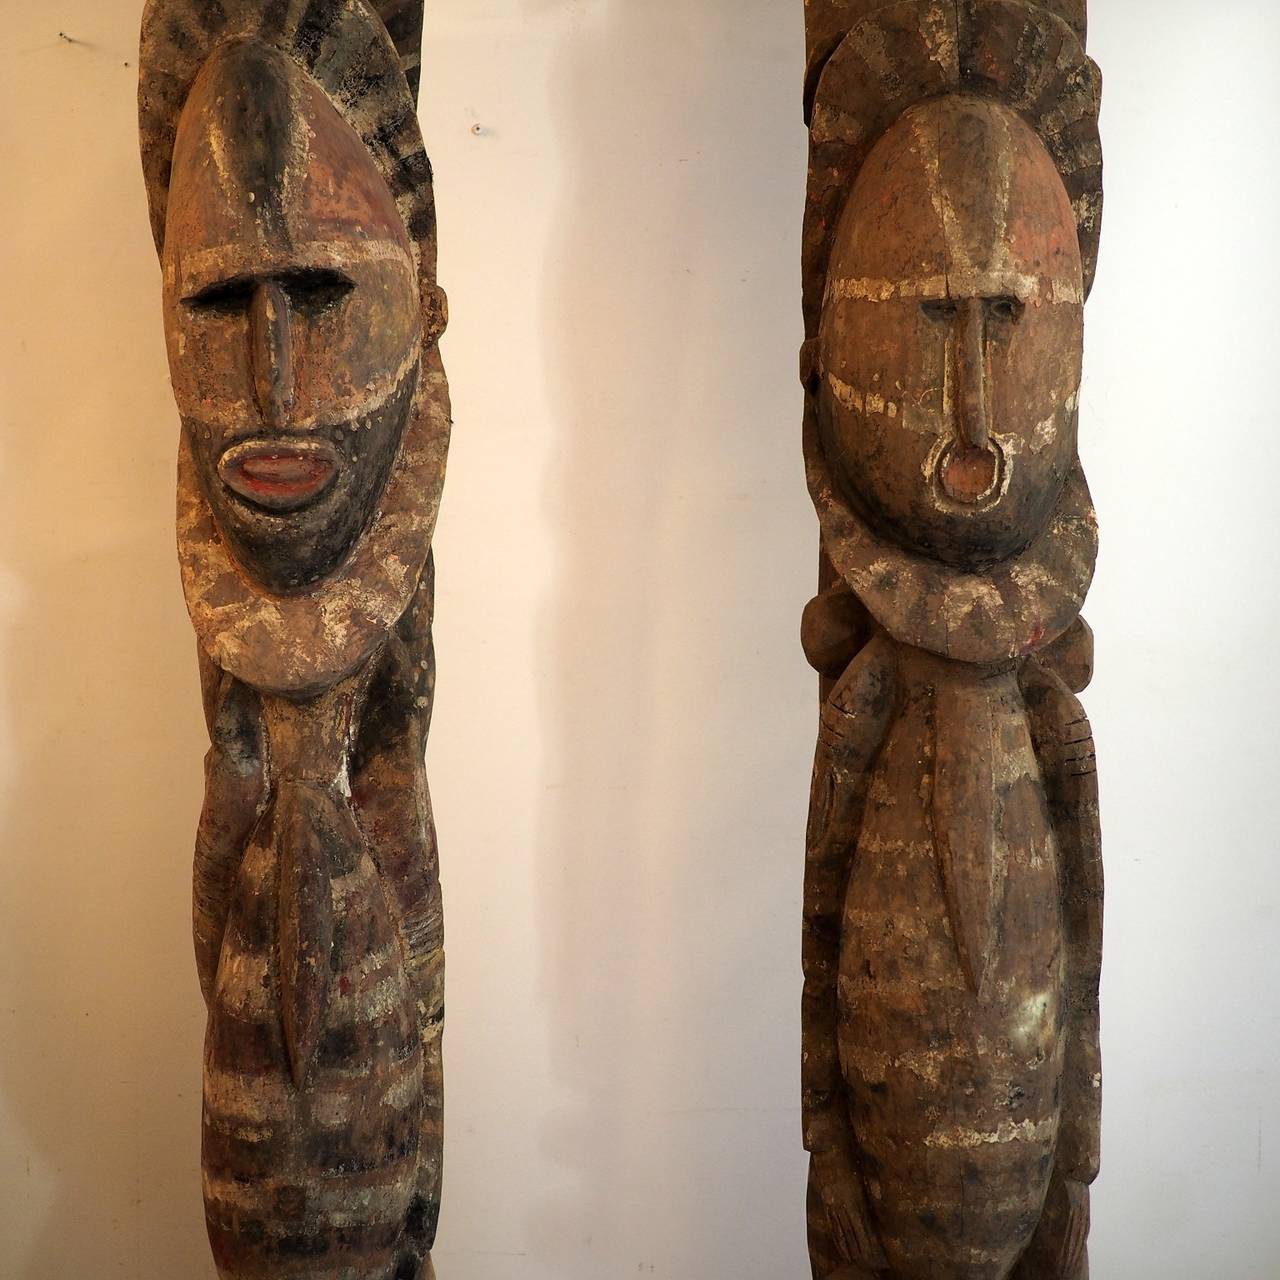 Two large figurative house posts, male and female. Made by the Abelam people, from the Maprik area of Papua New Guinea, in the Prince Alexander Mountains. carved wood with natural pigments, each mounted on a heavy steel stand. Female figure 235cm